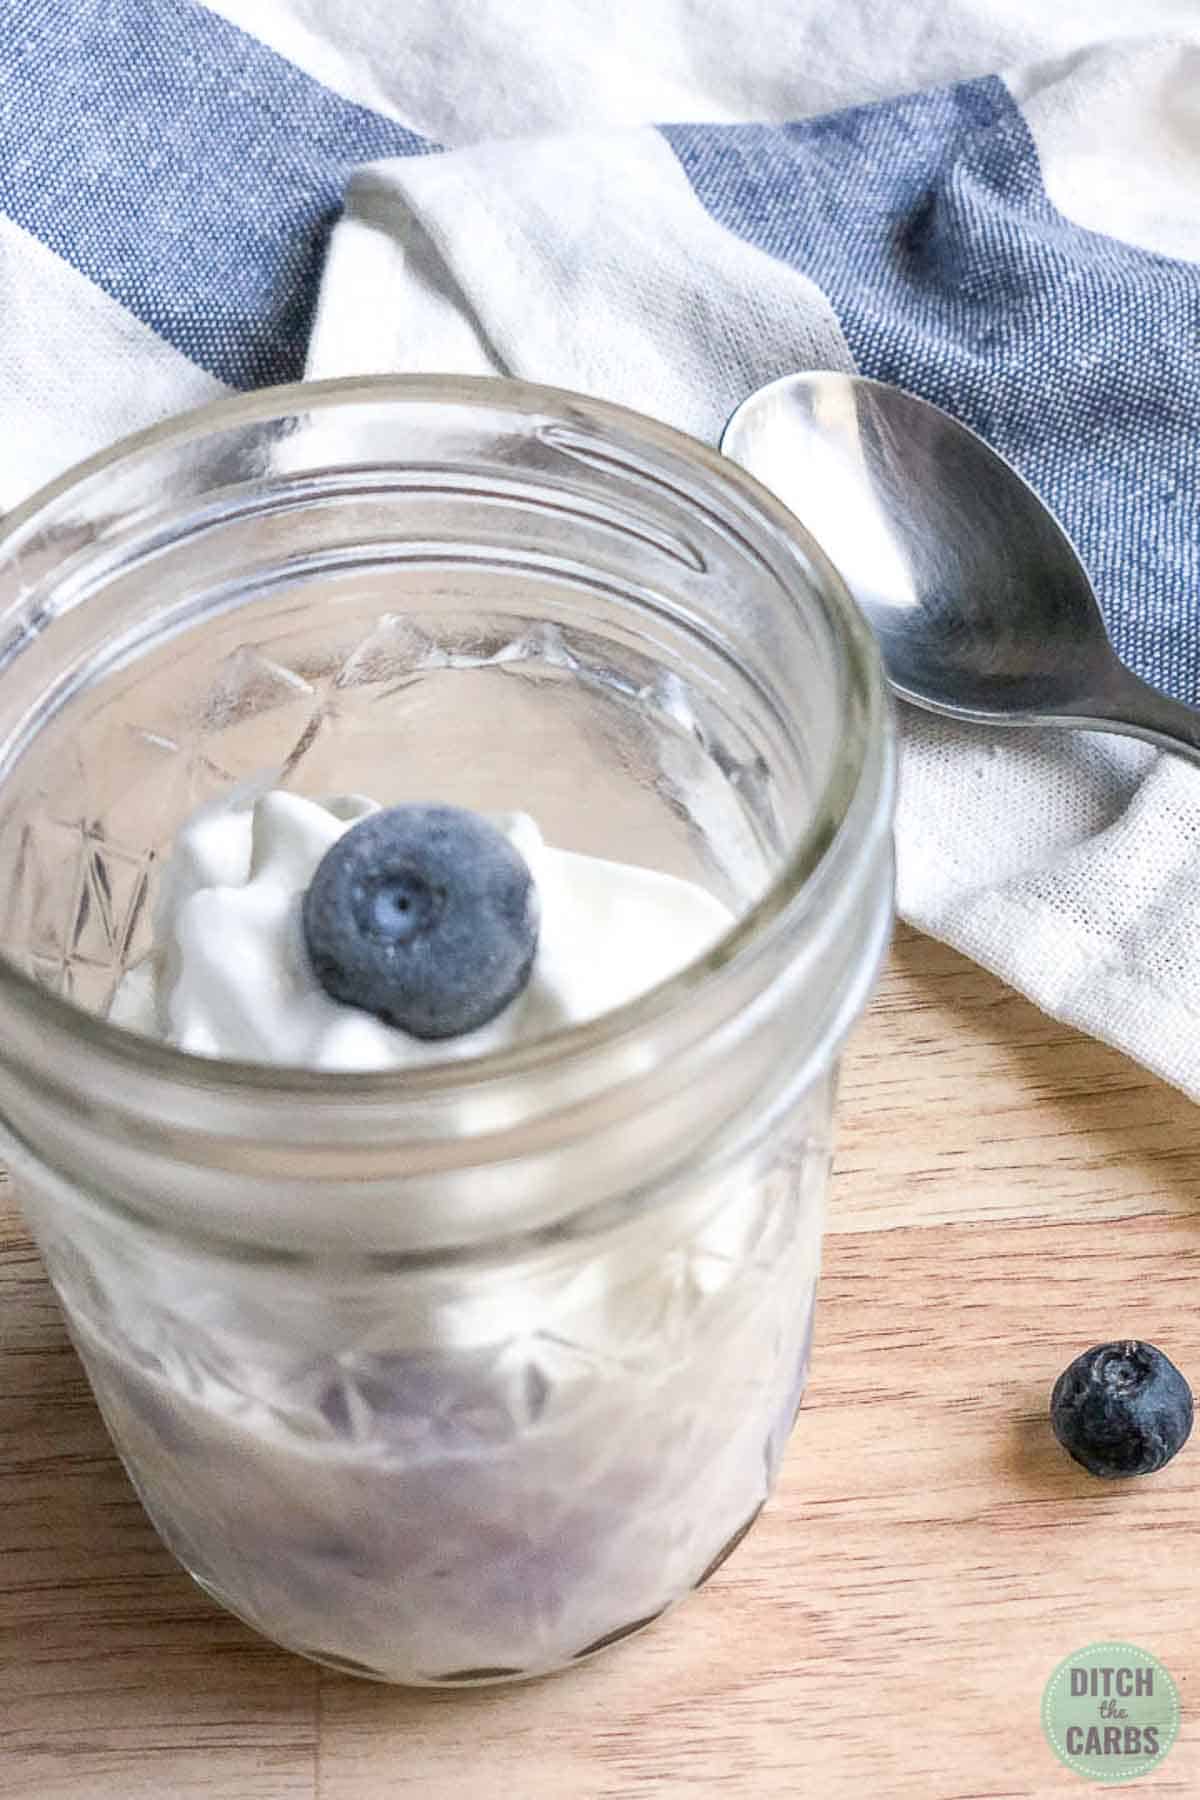 Cooked blueberry keto mug cheesecake is topped with whipped cream and a blueberry.